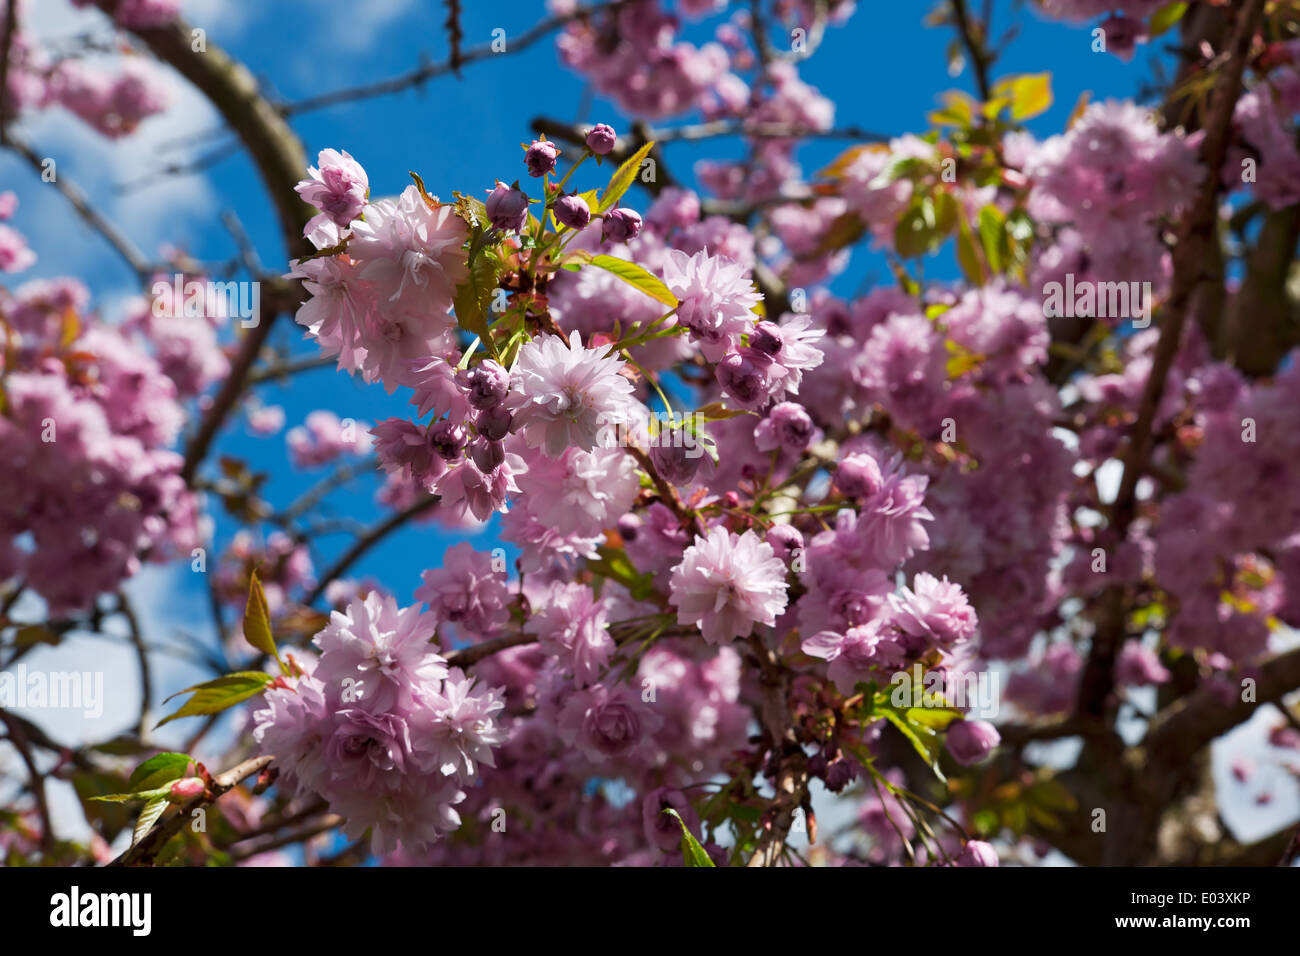 Close up of Pink blossom blossoms on flower flowers flowering ornamental cherry tree England UK United Kingdom GB Great Britain Stock Photo